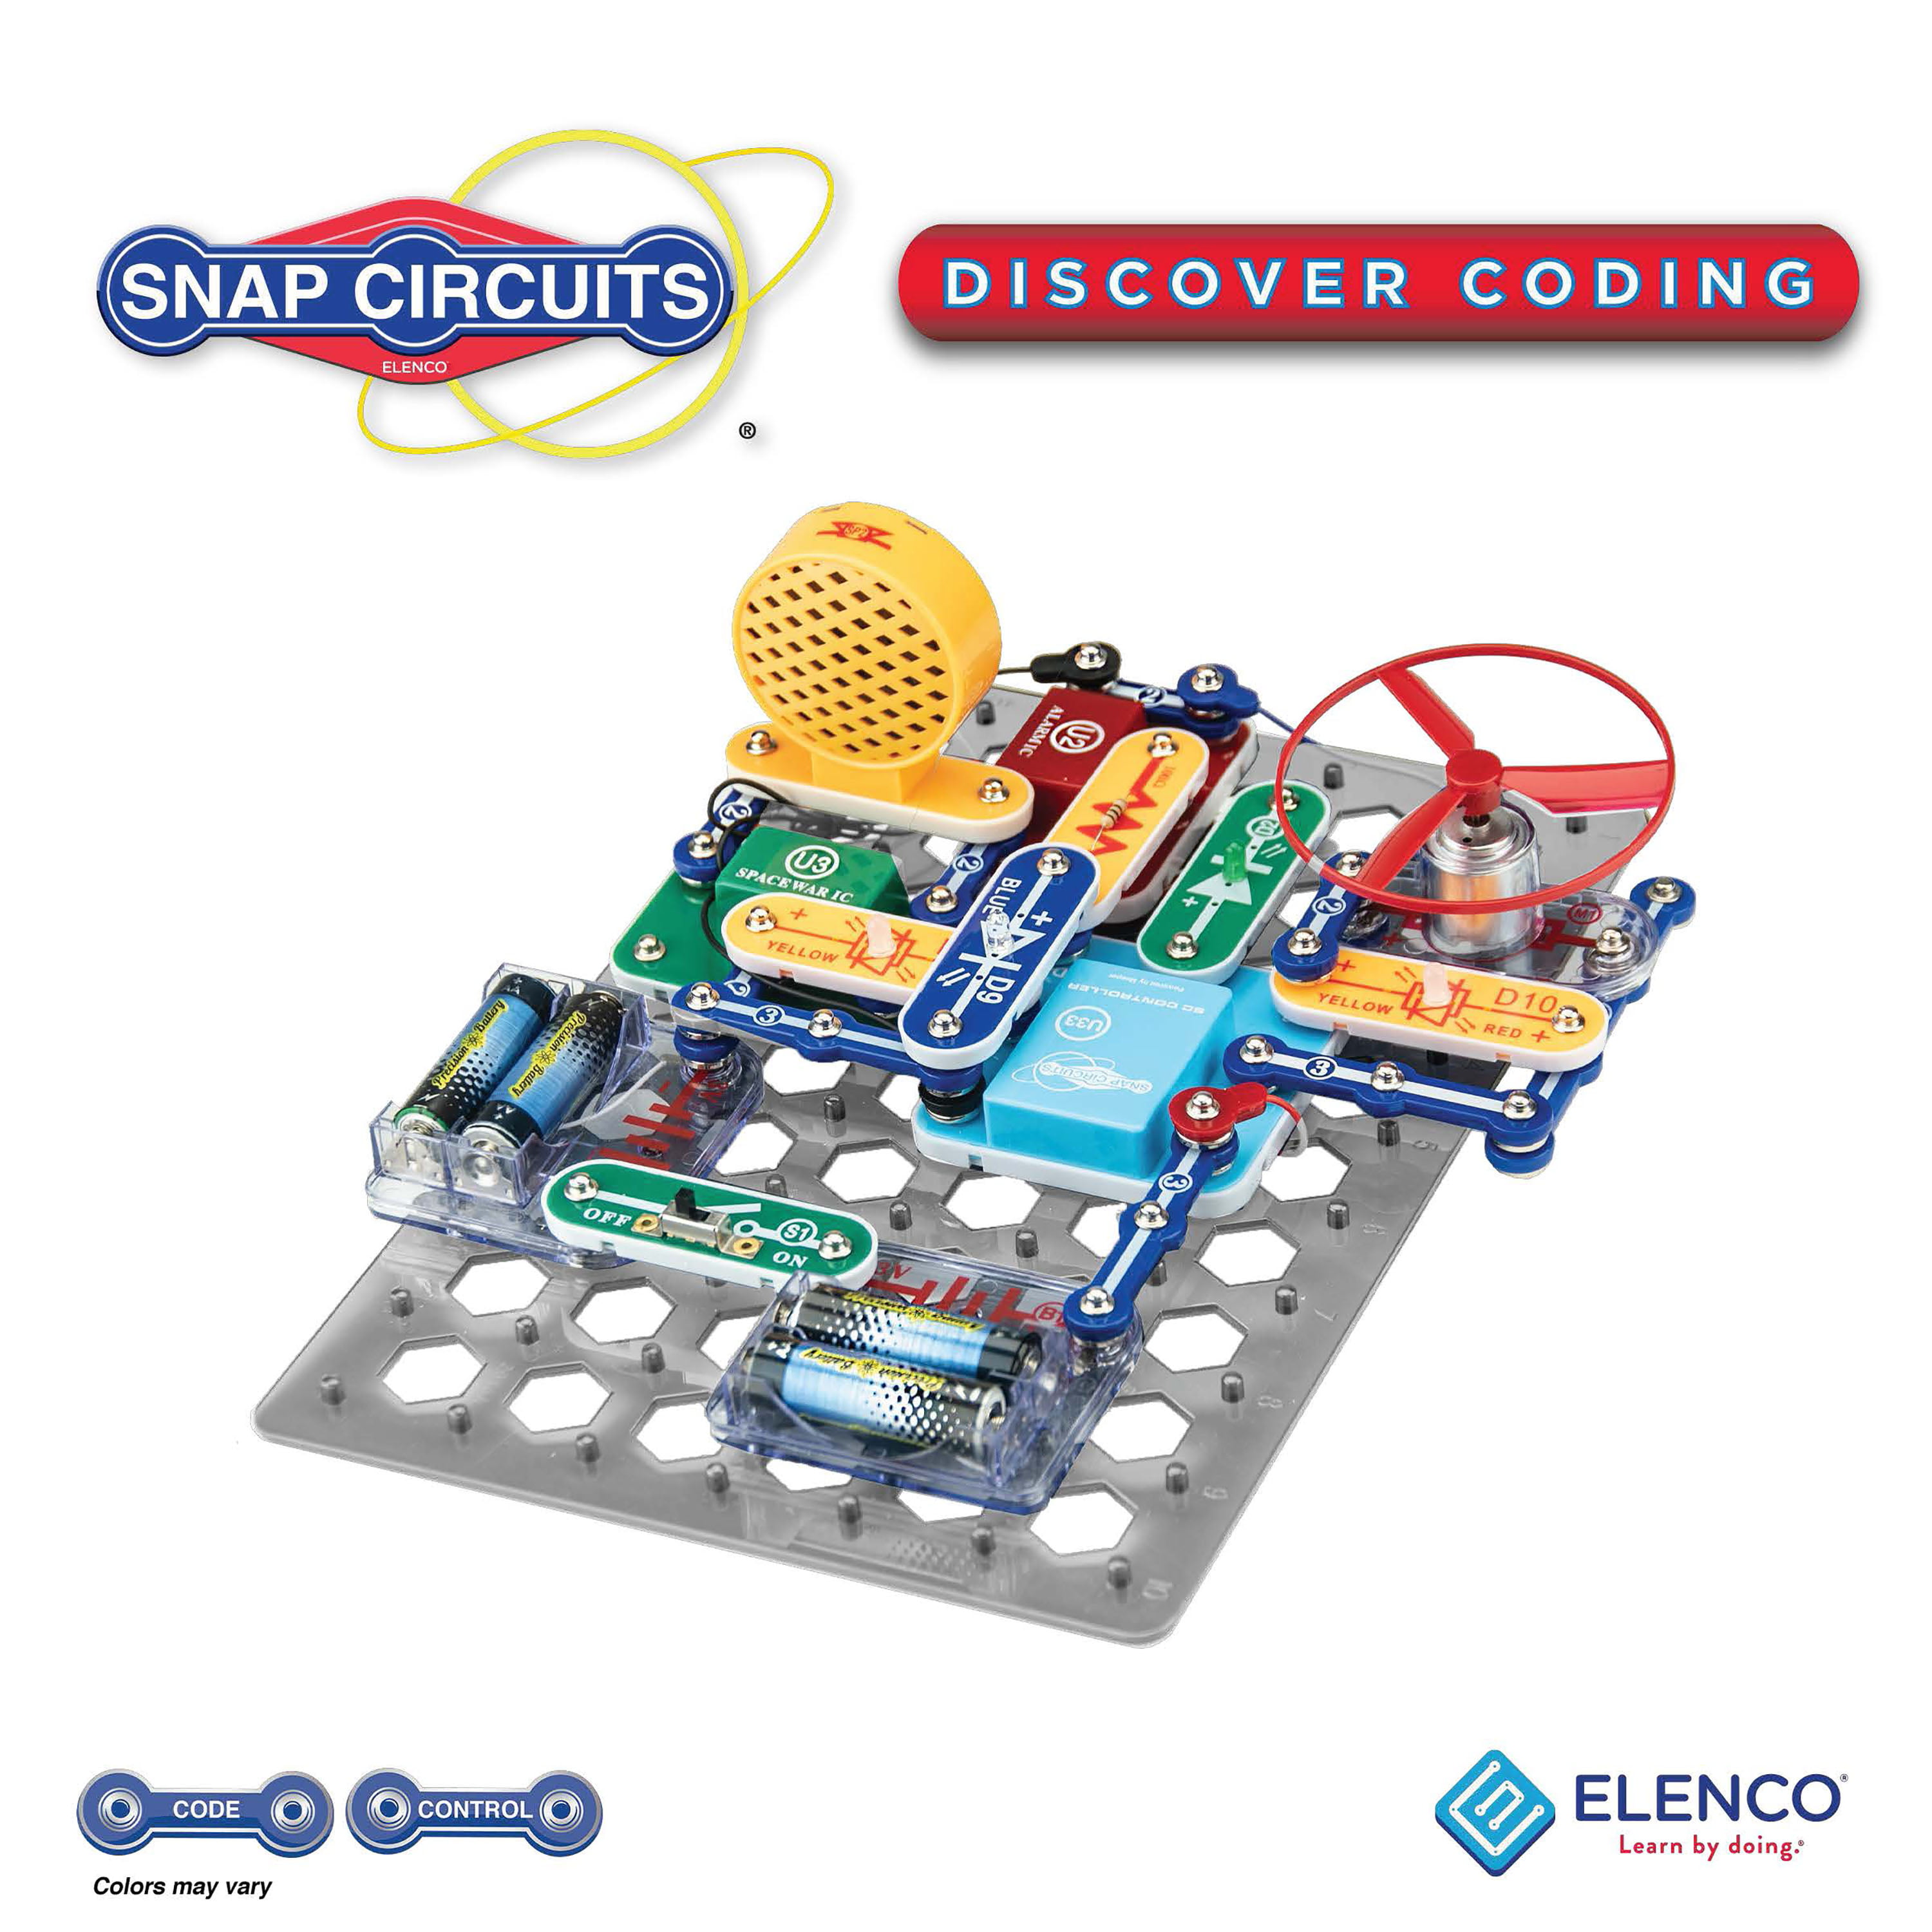 NEW Snap Circuits Lights Electronics Discovery Kit Electrical Educational Fun 